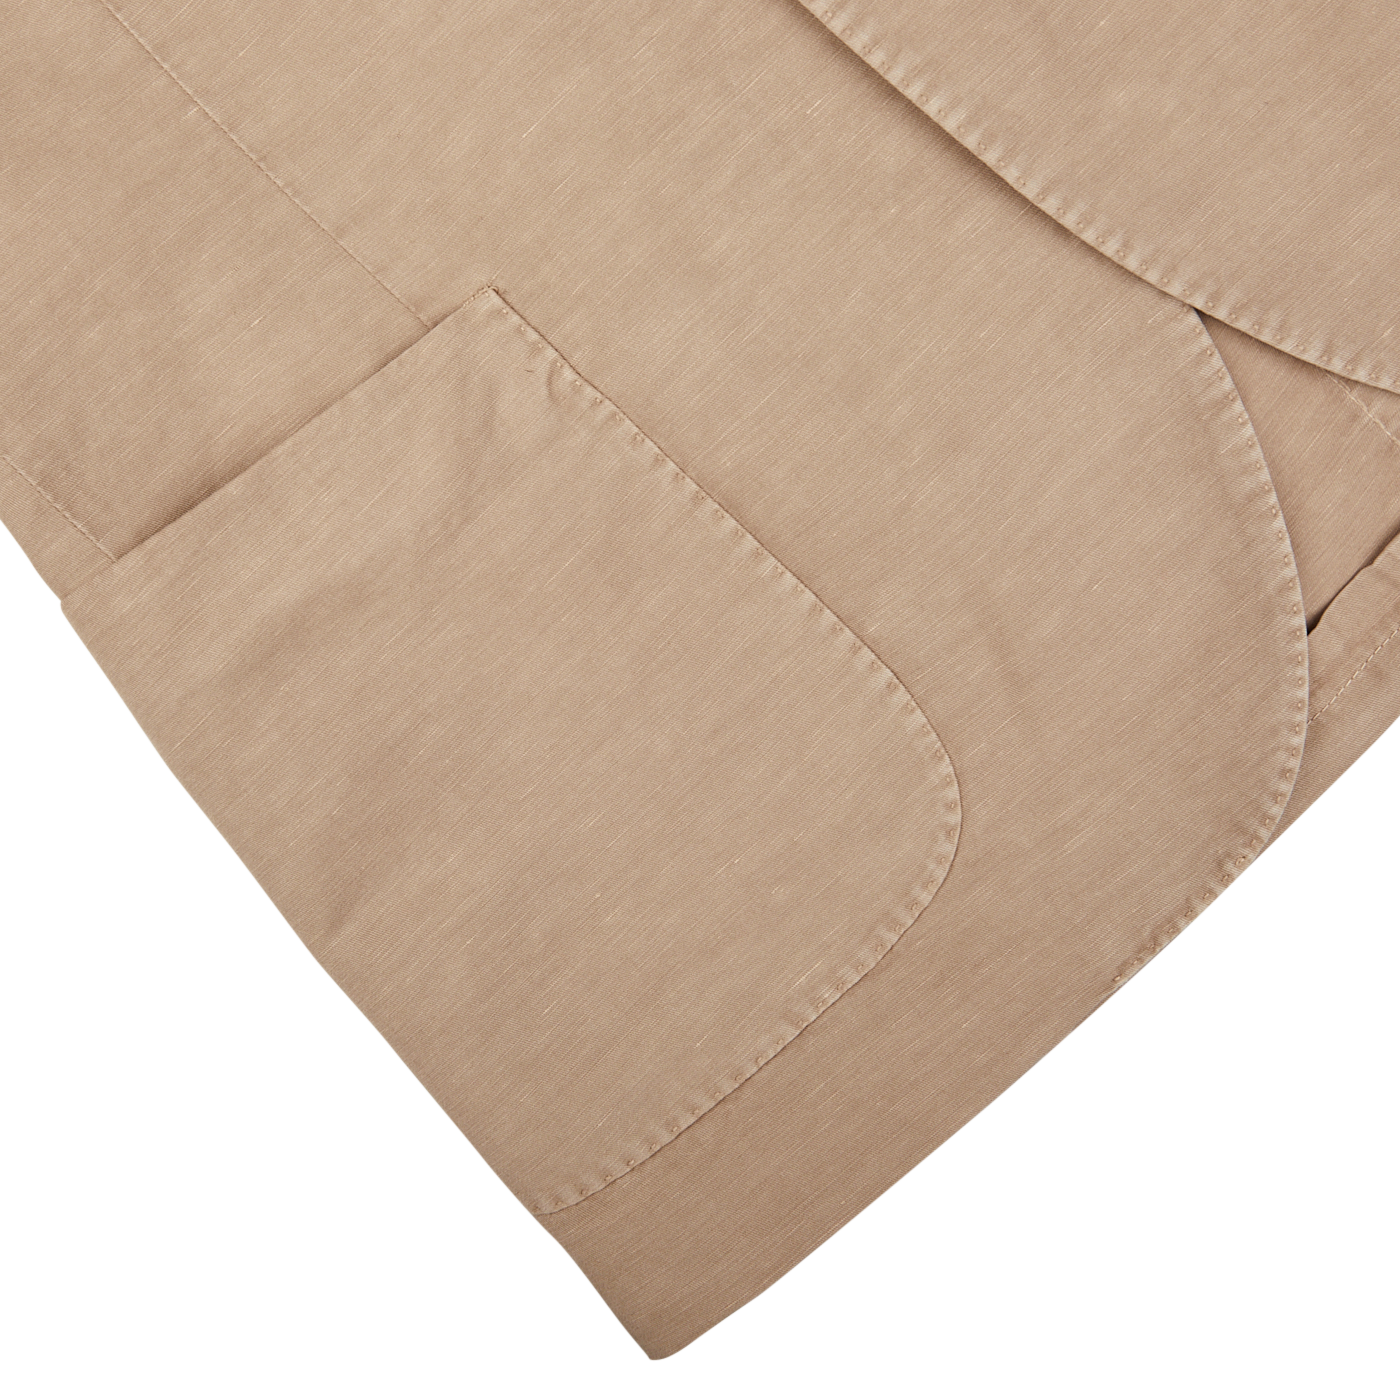 Beige linen-cotton fabric with a pocket detail showing stitching and design, reminiscent of the Light Beige Washed Chinolino Suit by Slowear.